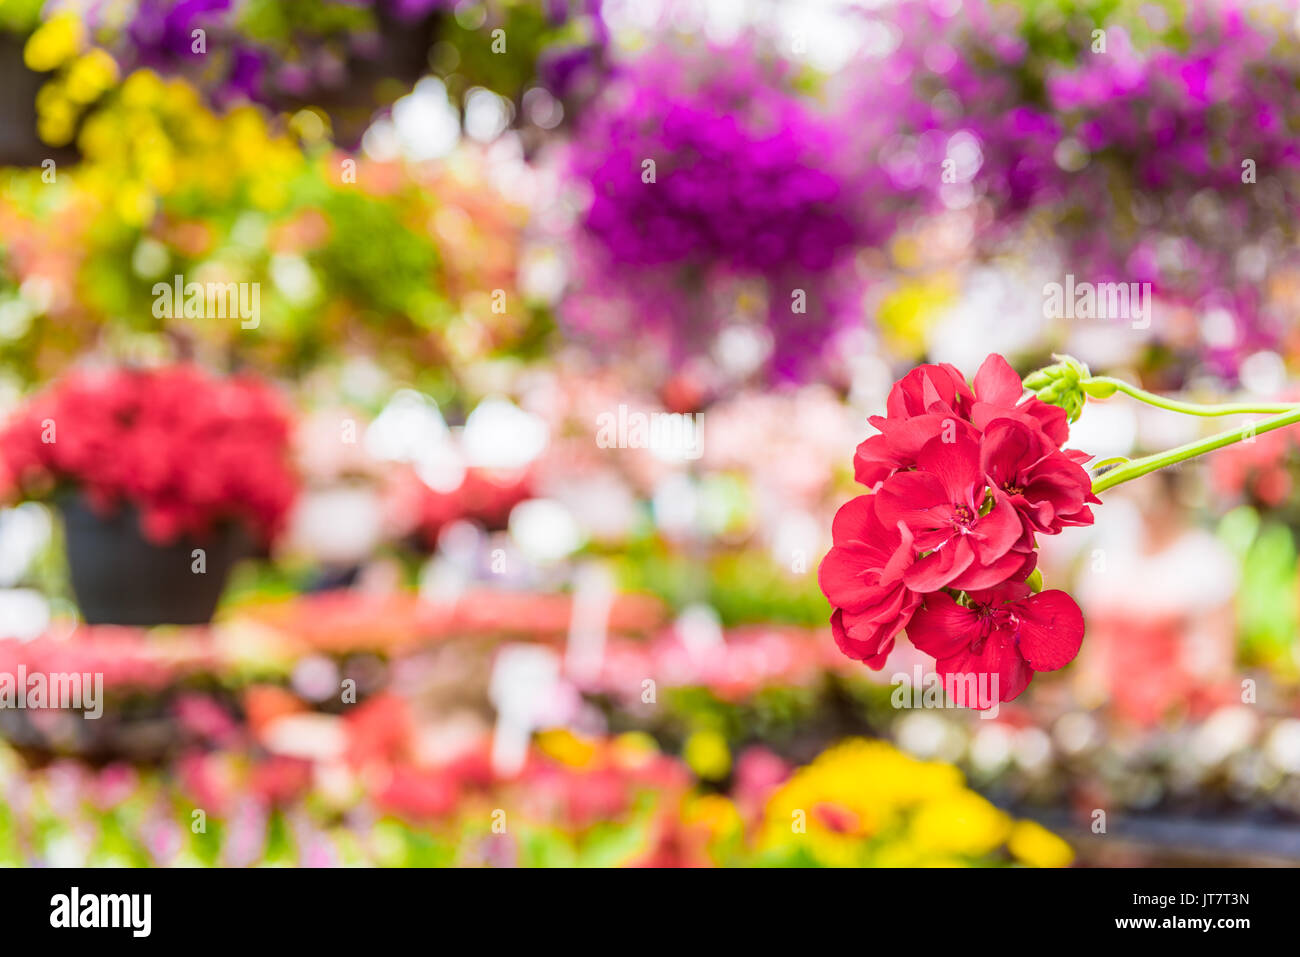 Macro closeup of red begonia flowers with bokeh background of colorful garden nursery florist center Stock Photo